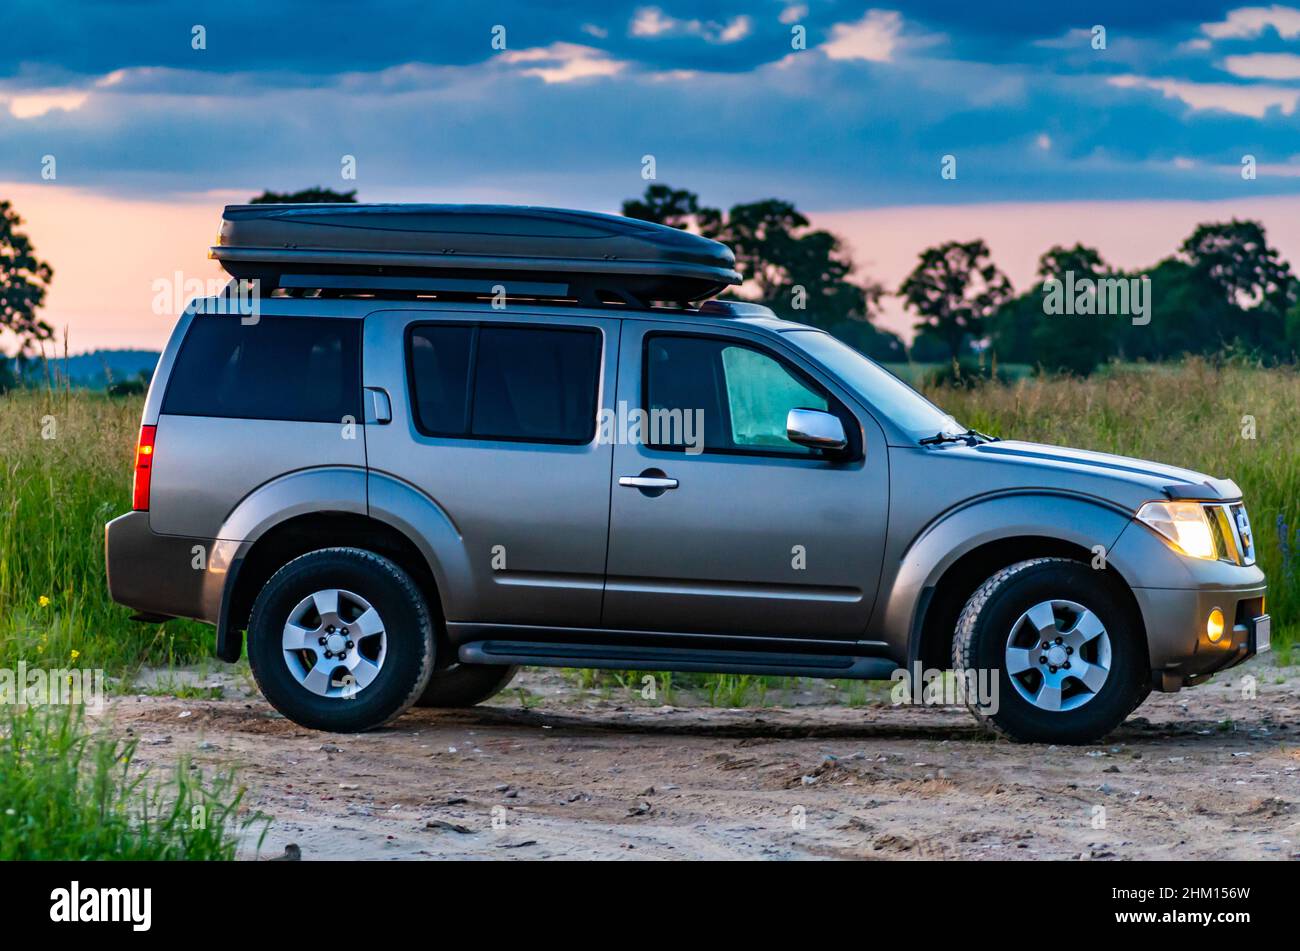 nissan pathfinder in the evening Stock Photo